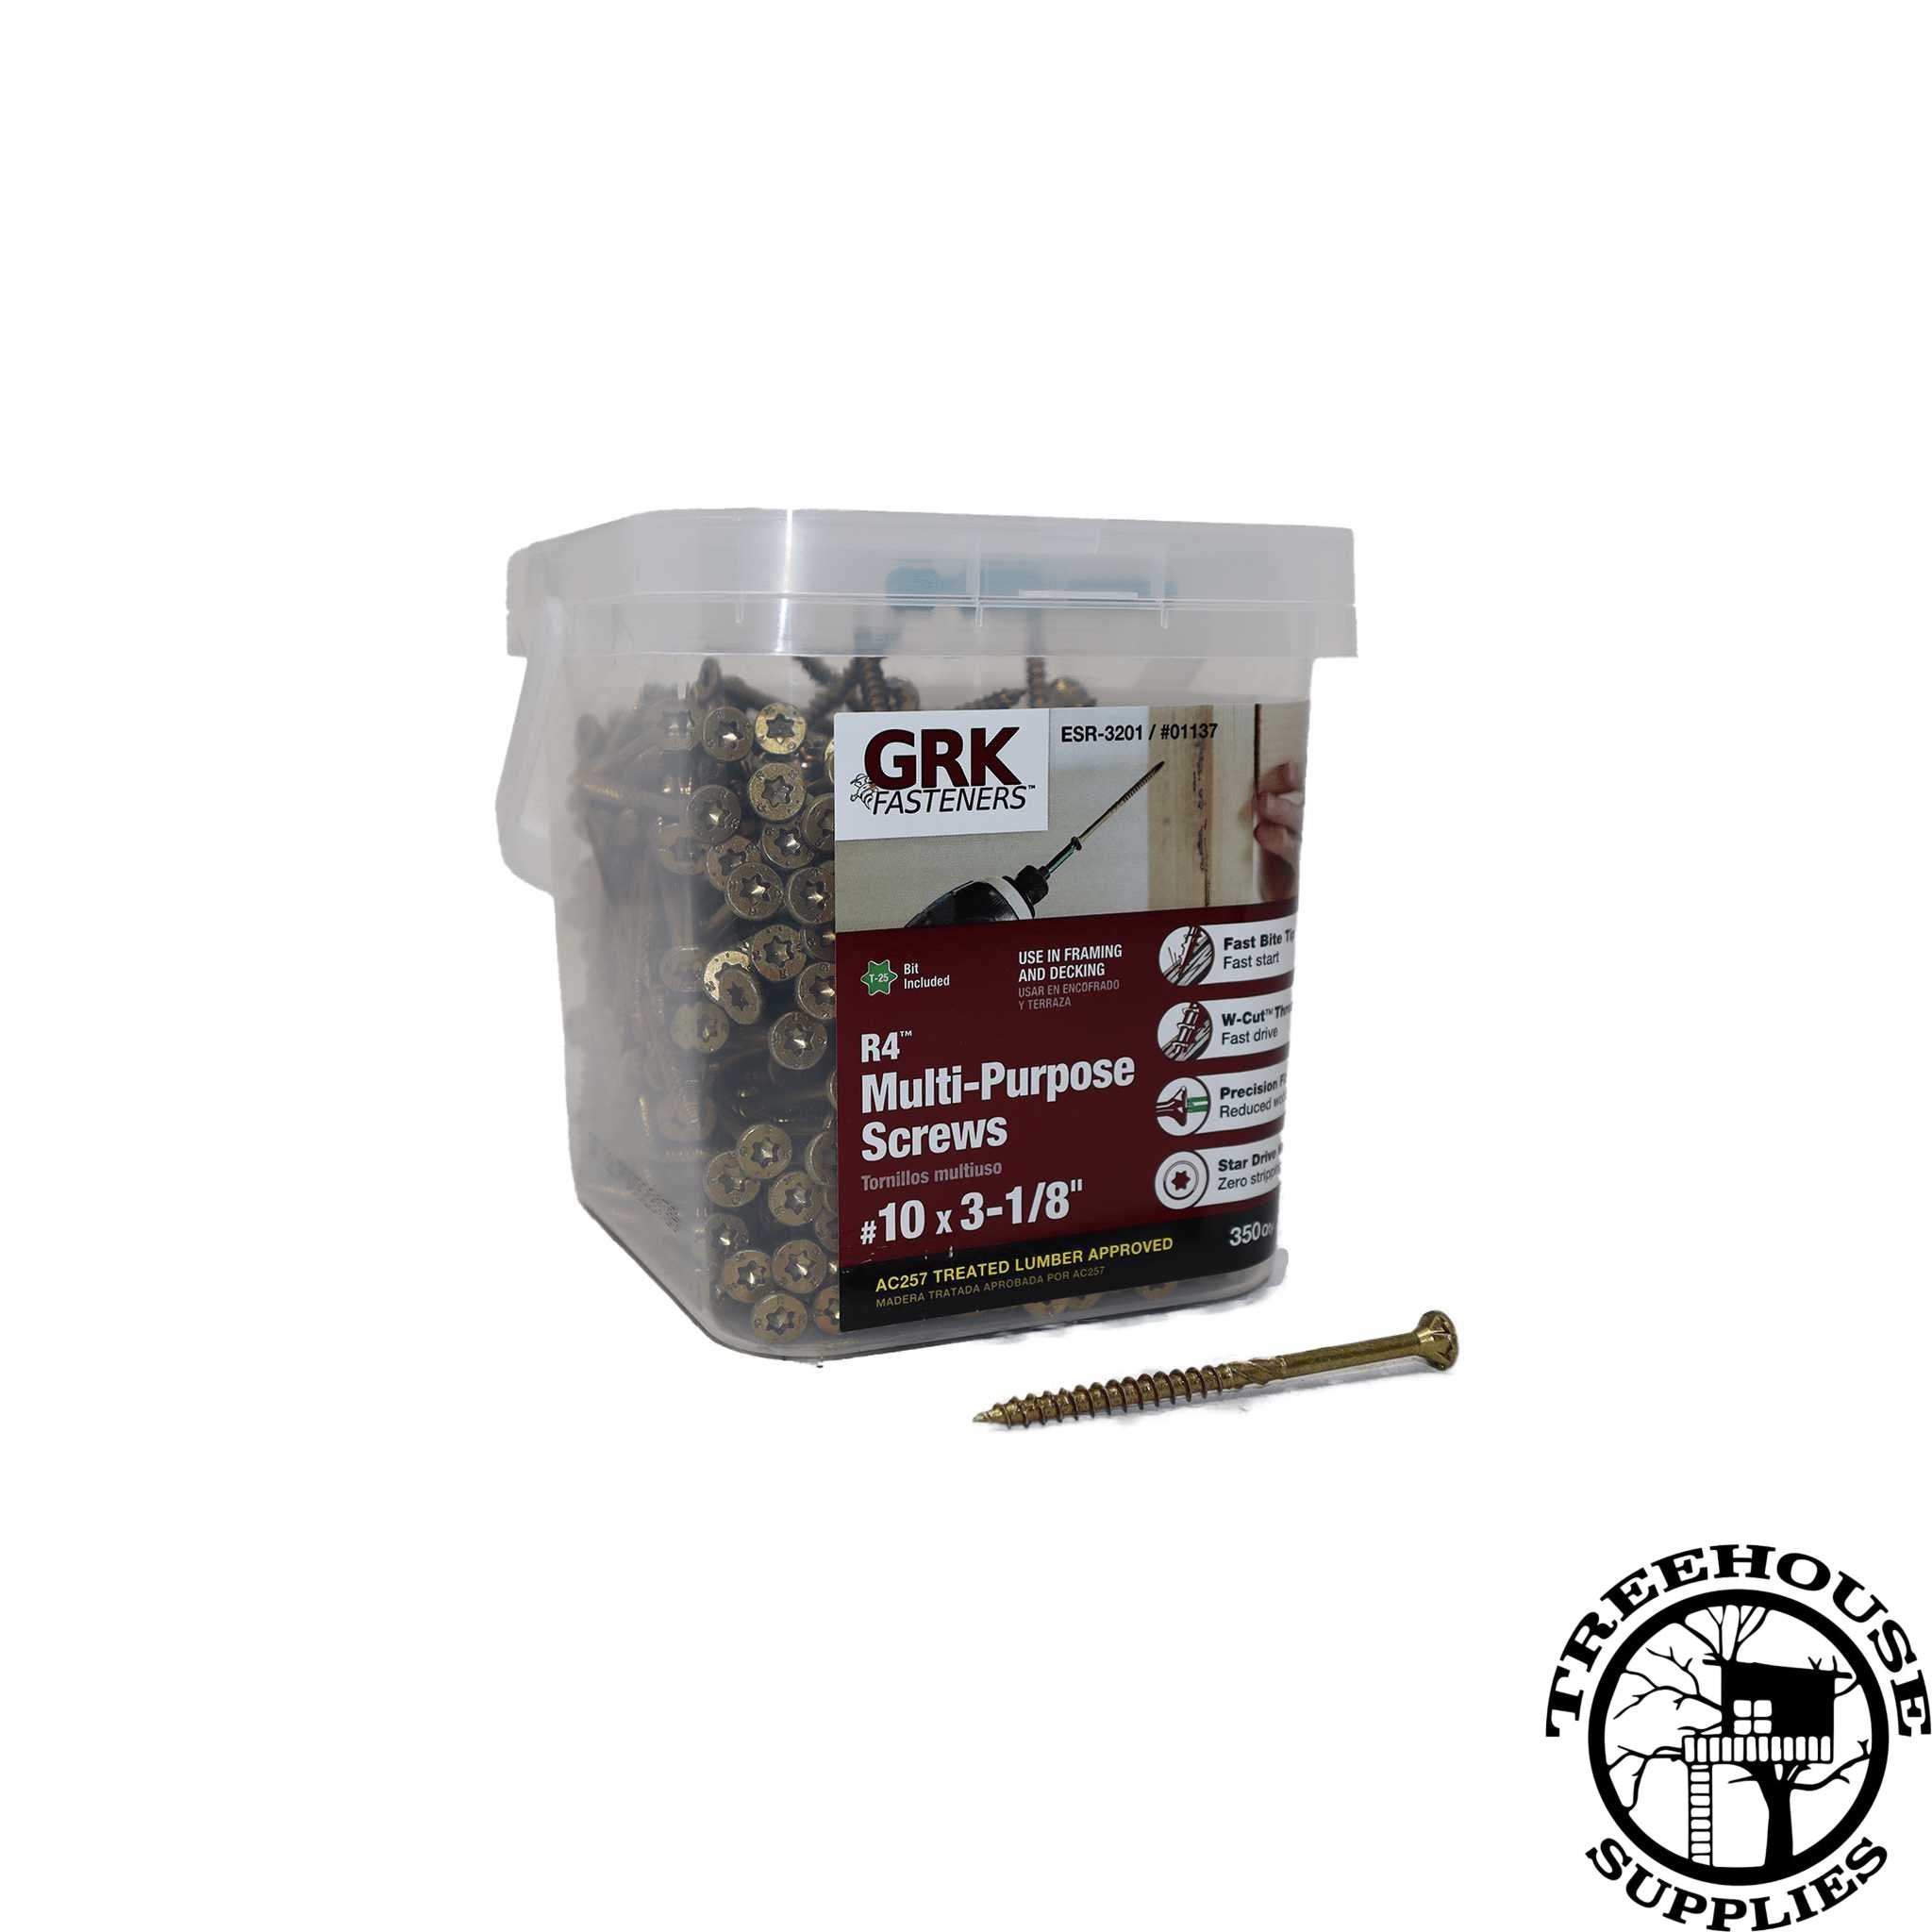 Small 350 count pro pack of 10 x 3-1/8" GRK Screws. White Background. Individual screw shown under box.